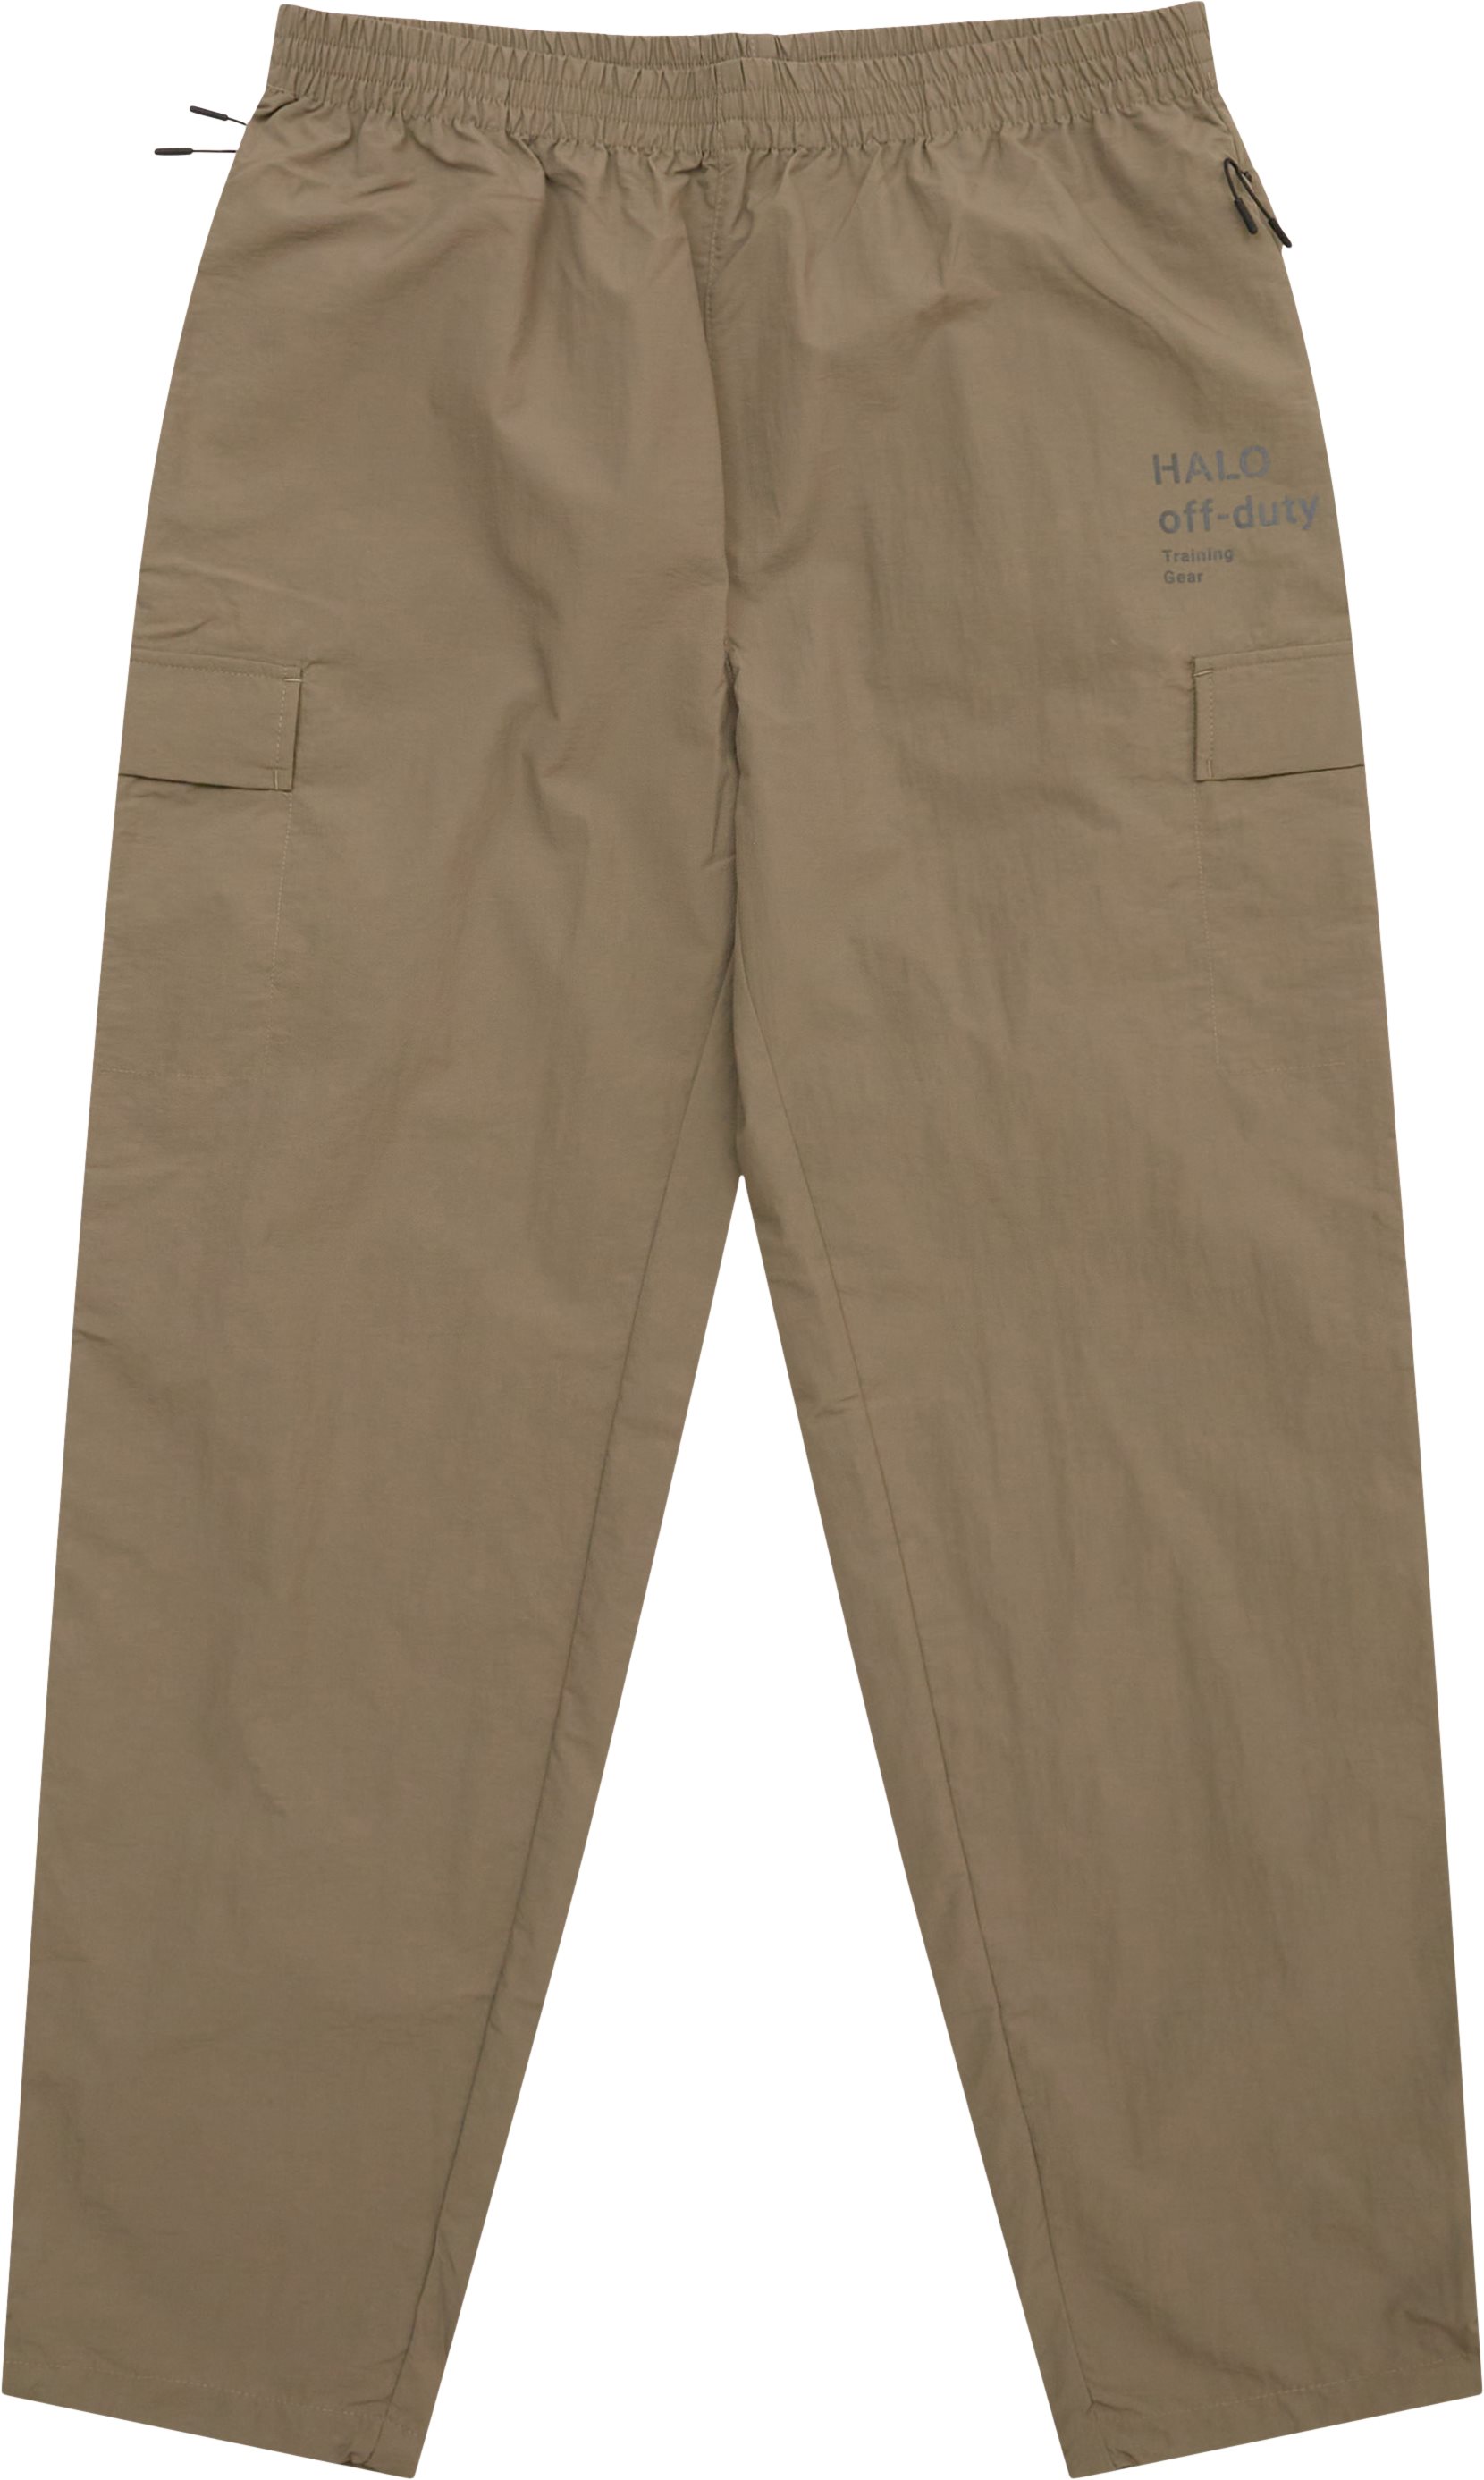 HALO Trousers OFF DUTY PANTS 610418 Brown